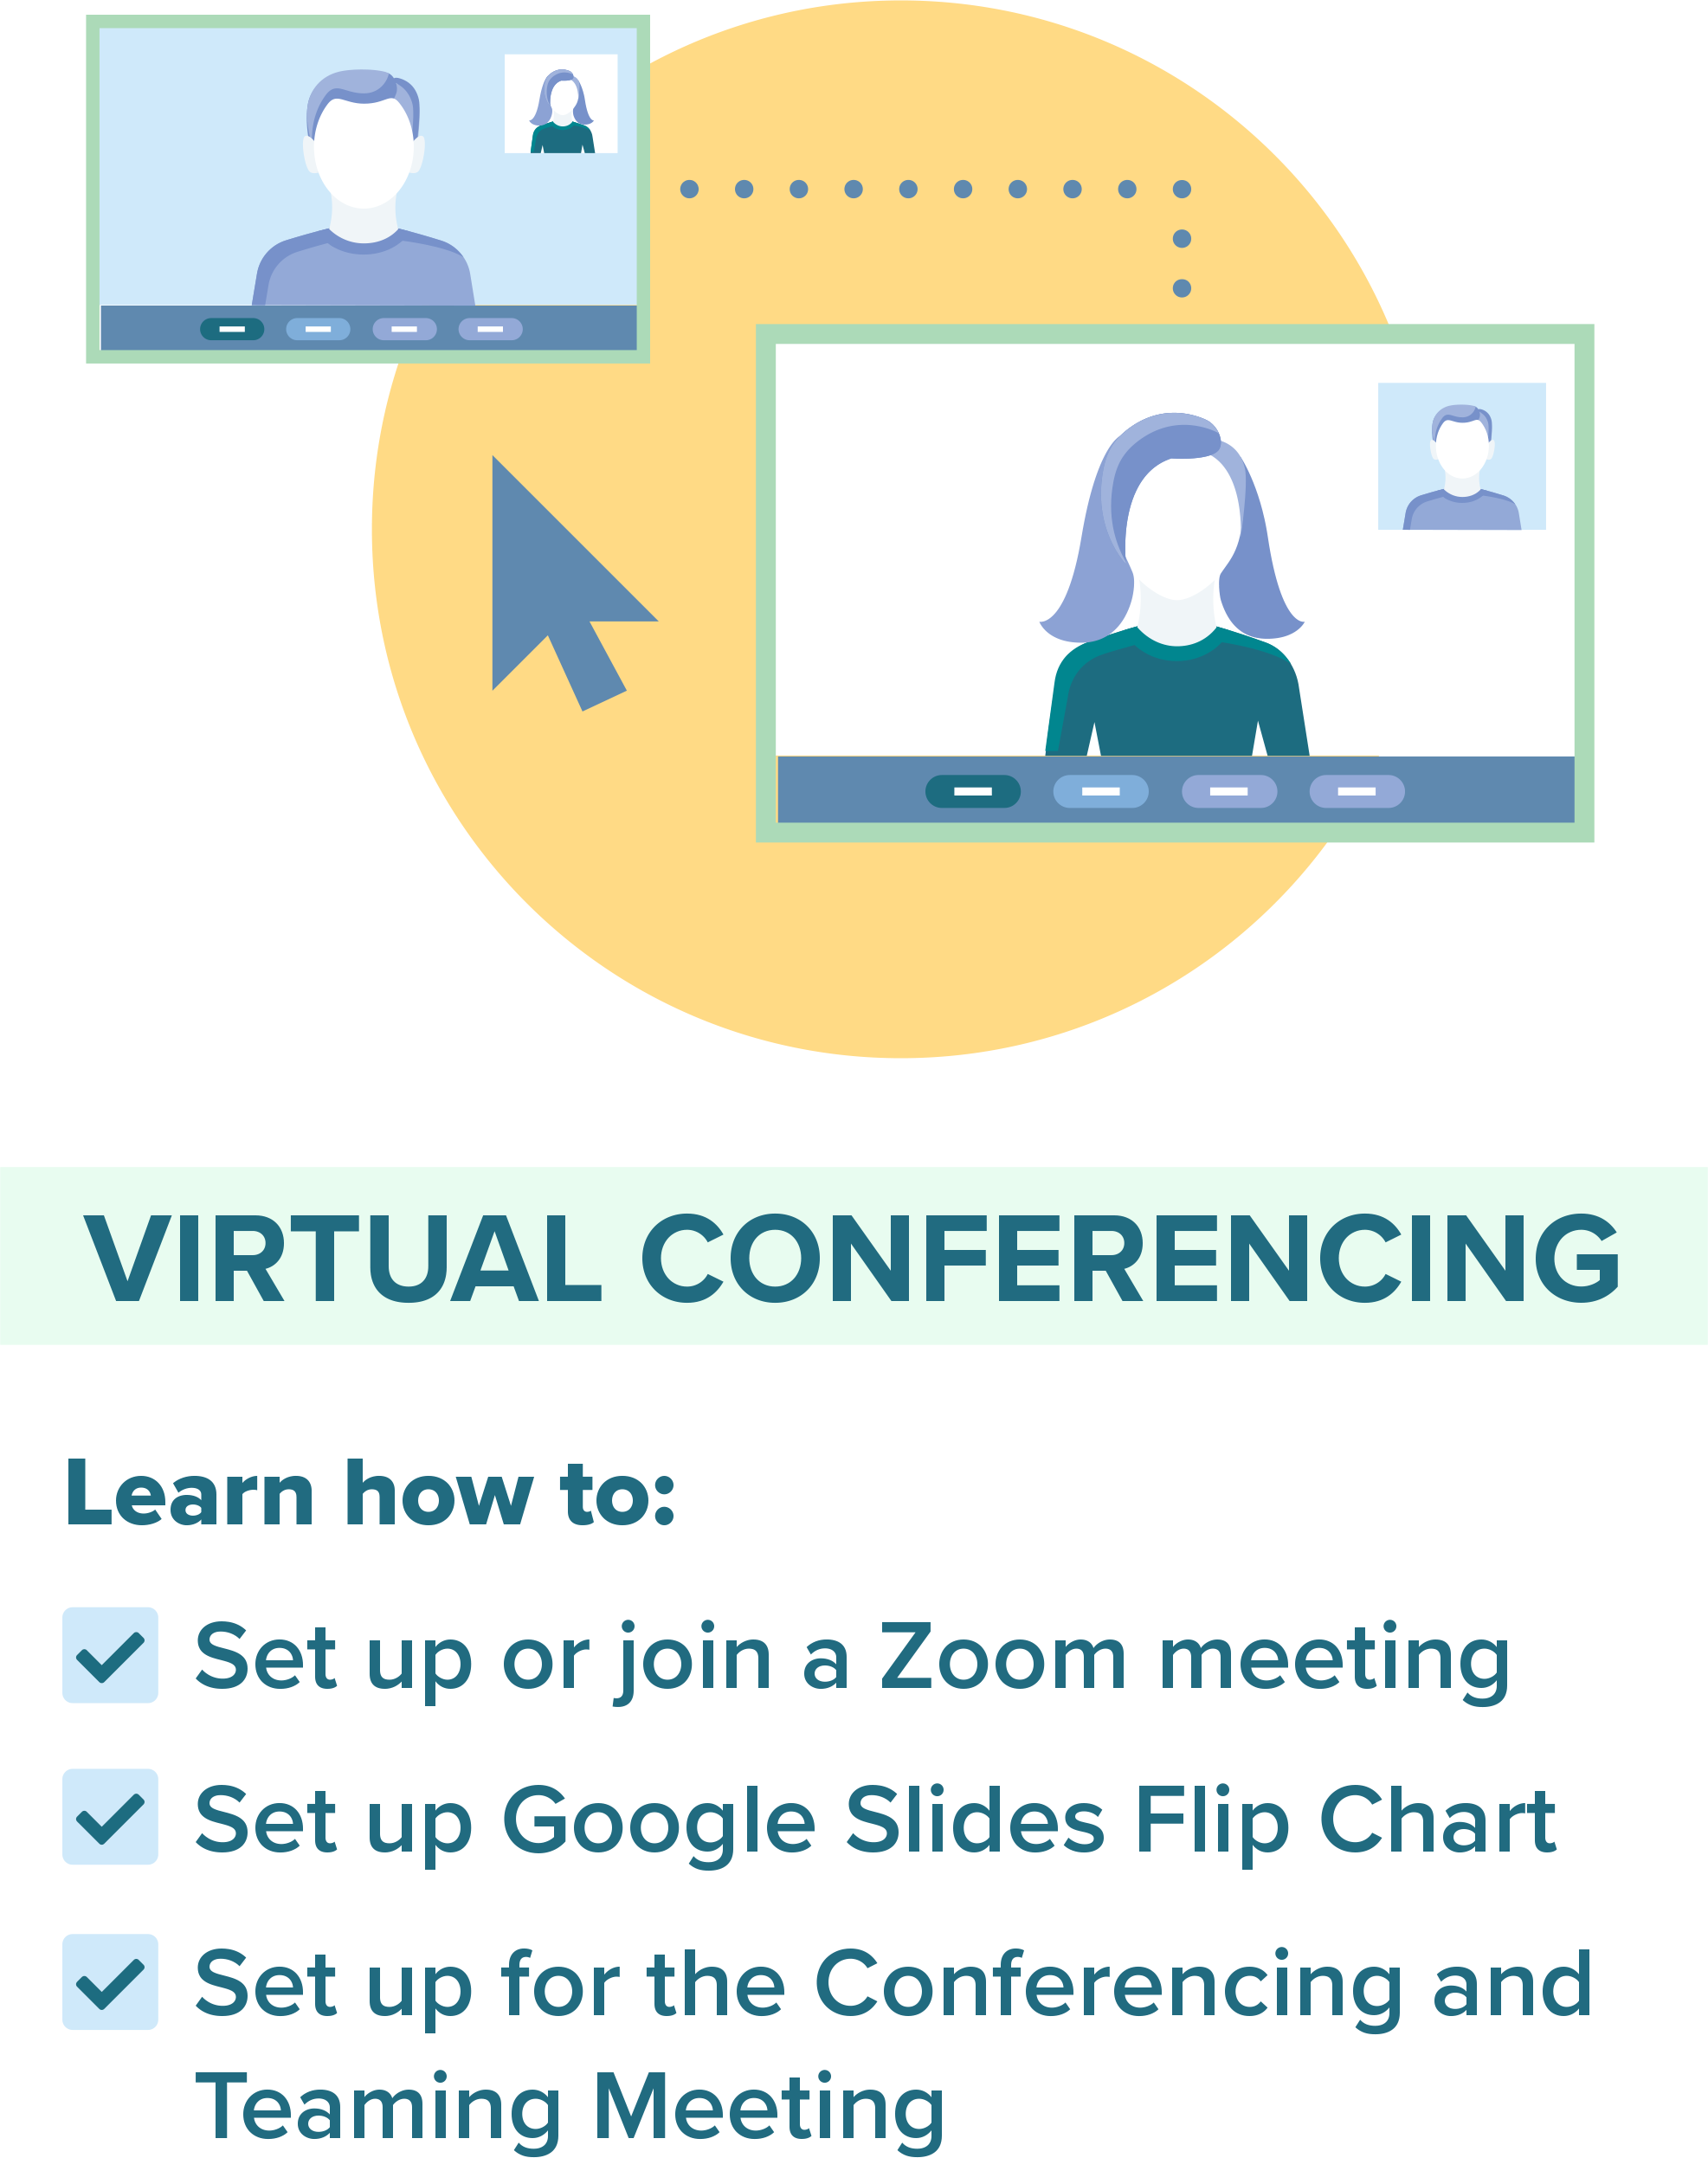 Virtual conferencing infographic